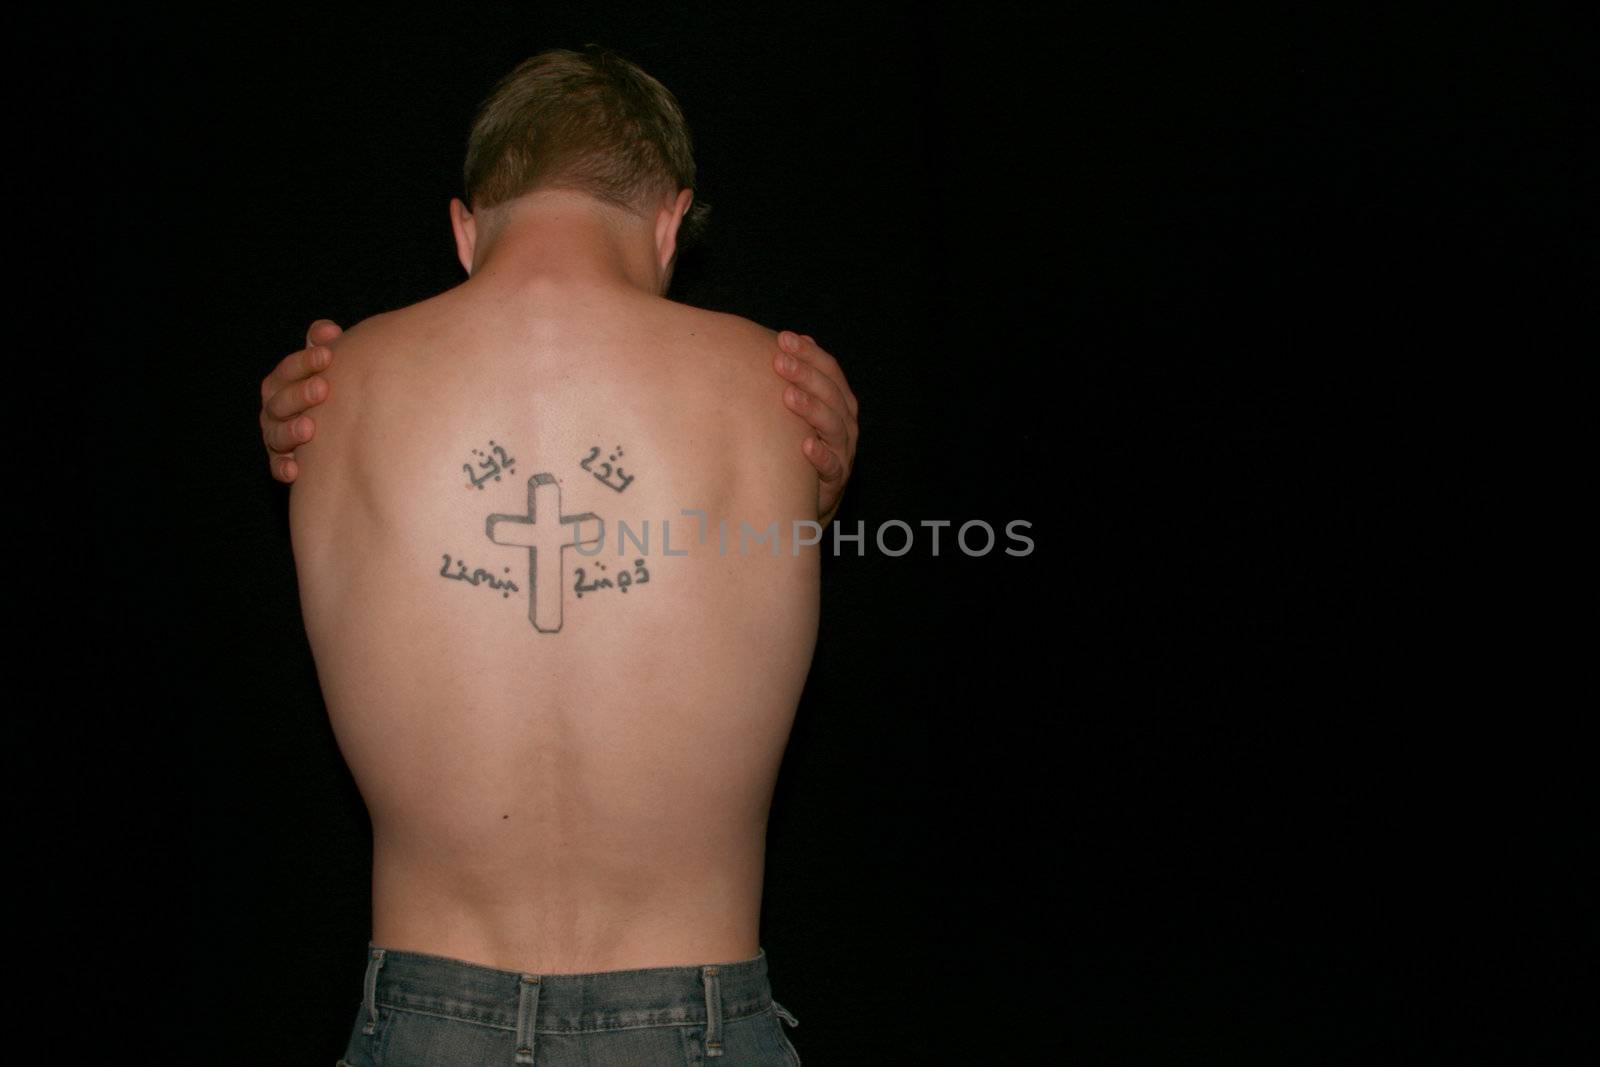 A topless man hugging himself, his back showing a crucifix tattoo.